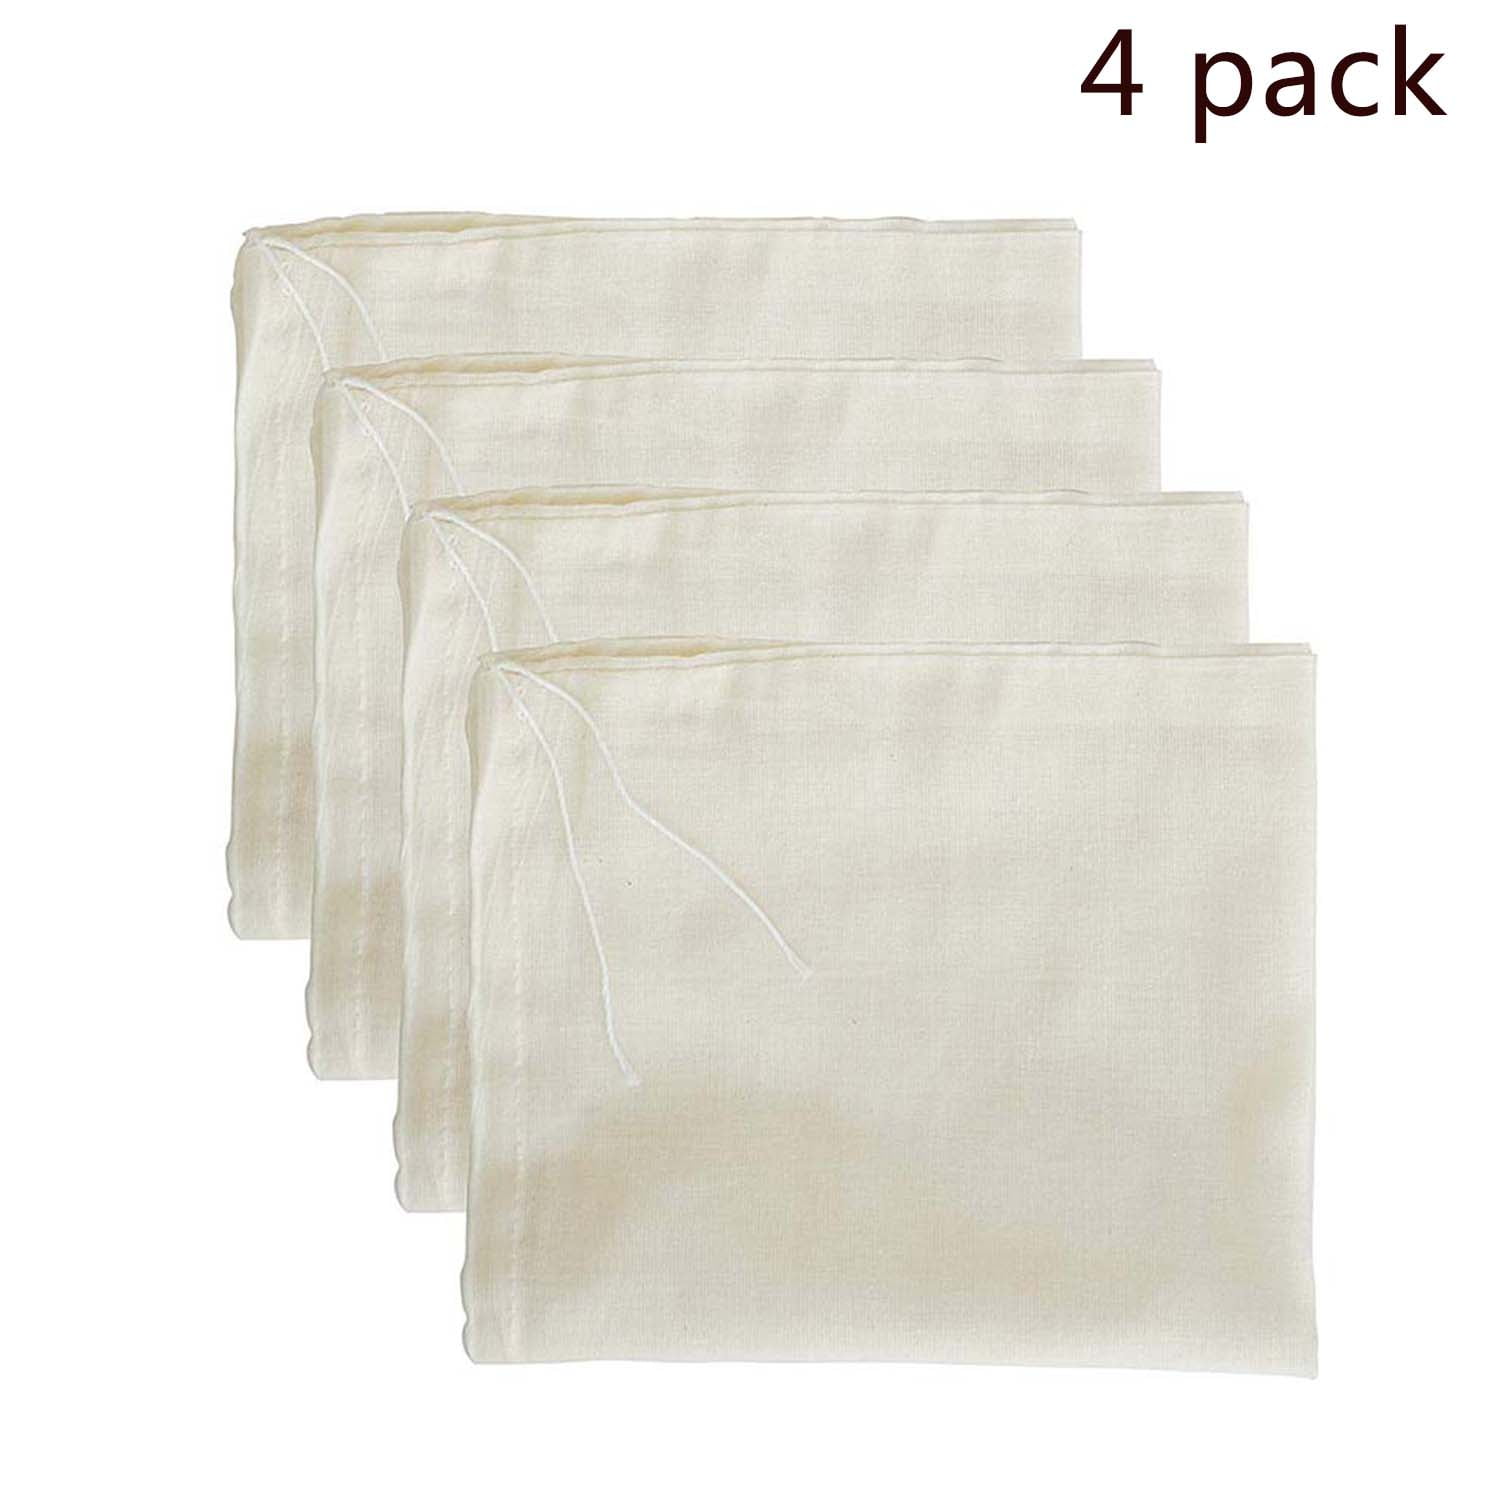 AIEVE Cheesecloth Bags 24 Pieces Reusable Cotton Cheese Cloths Nut Milk Bag Reusable Tea Bag Spice Bags Muslin Bags Unbleached for Herbs Tea Coffee Cooking Brewing Straining 4x6/10x15cm